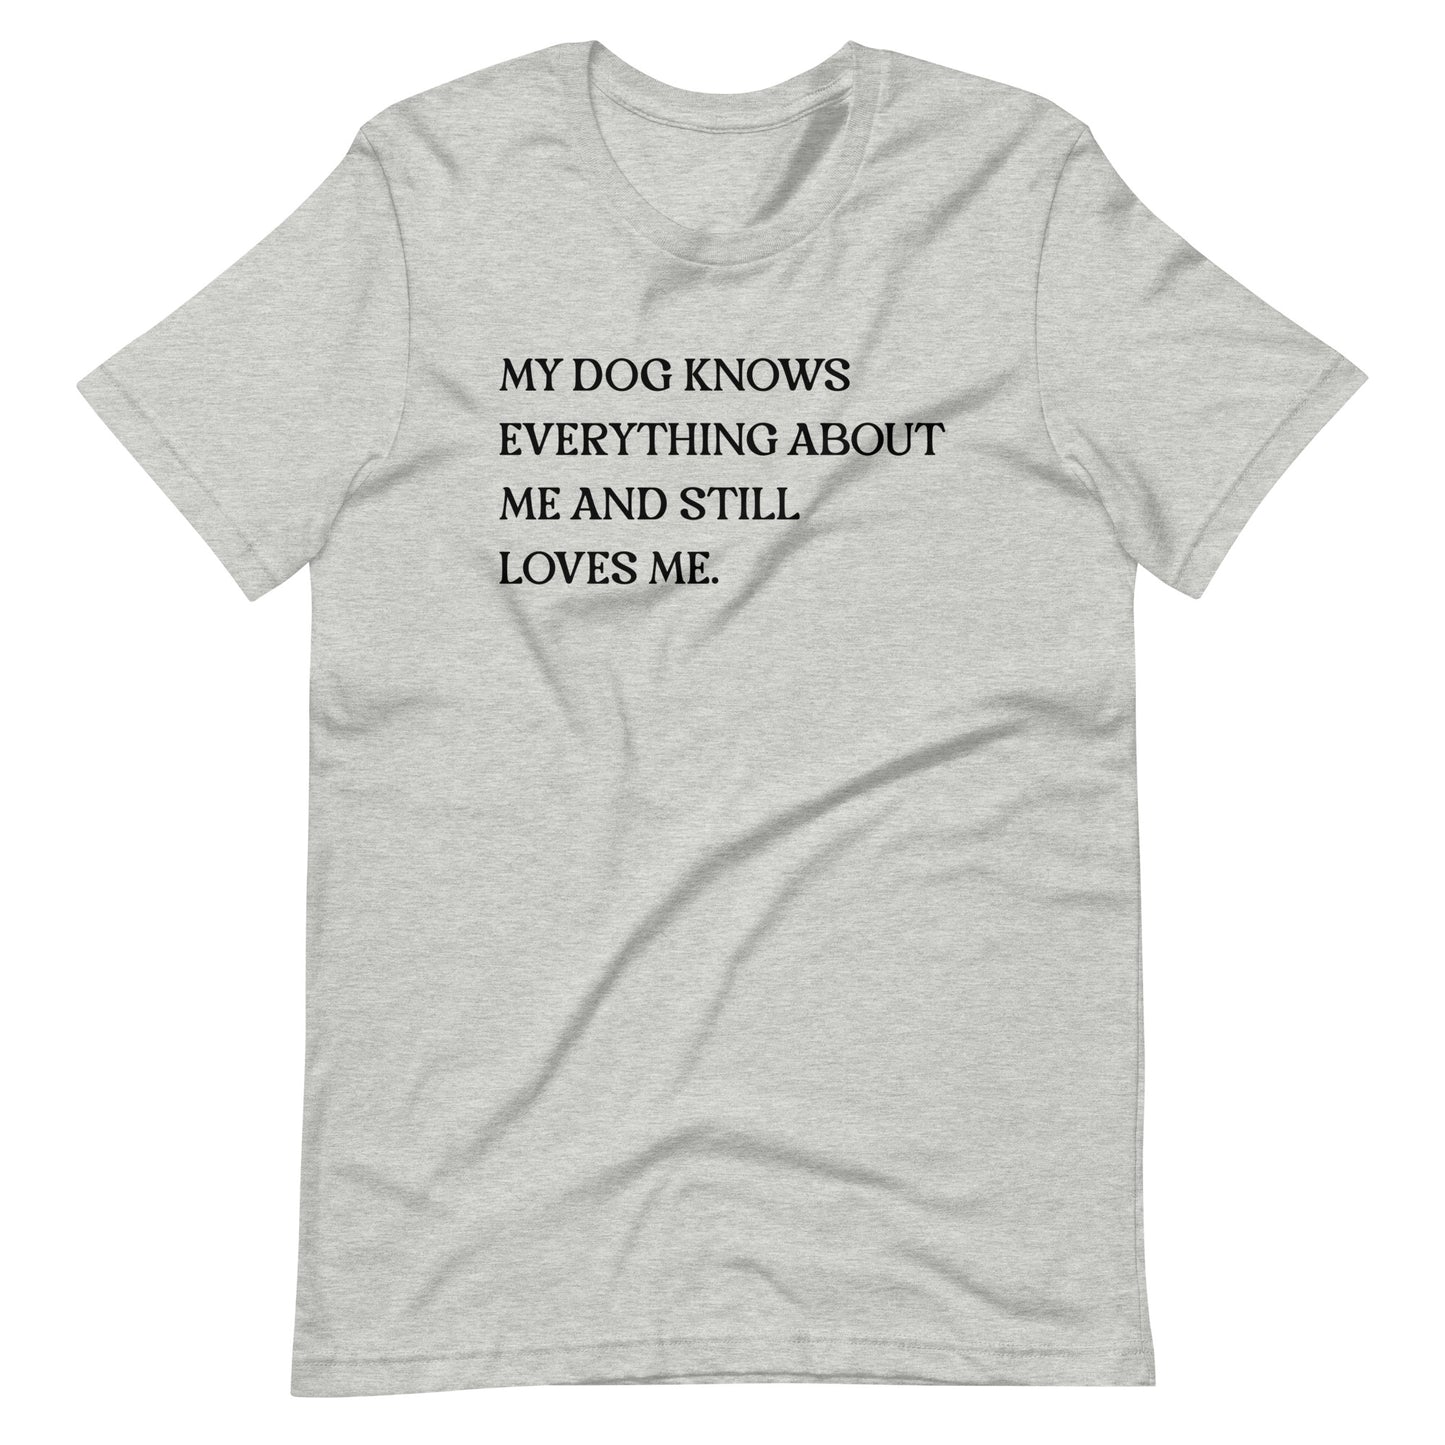 My Dog Knows Everything About Me and Still Loves Me T-Shirt